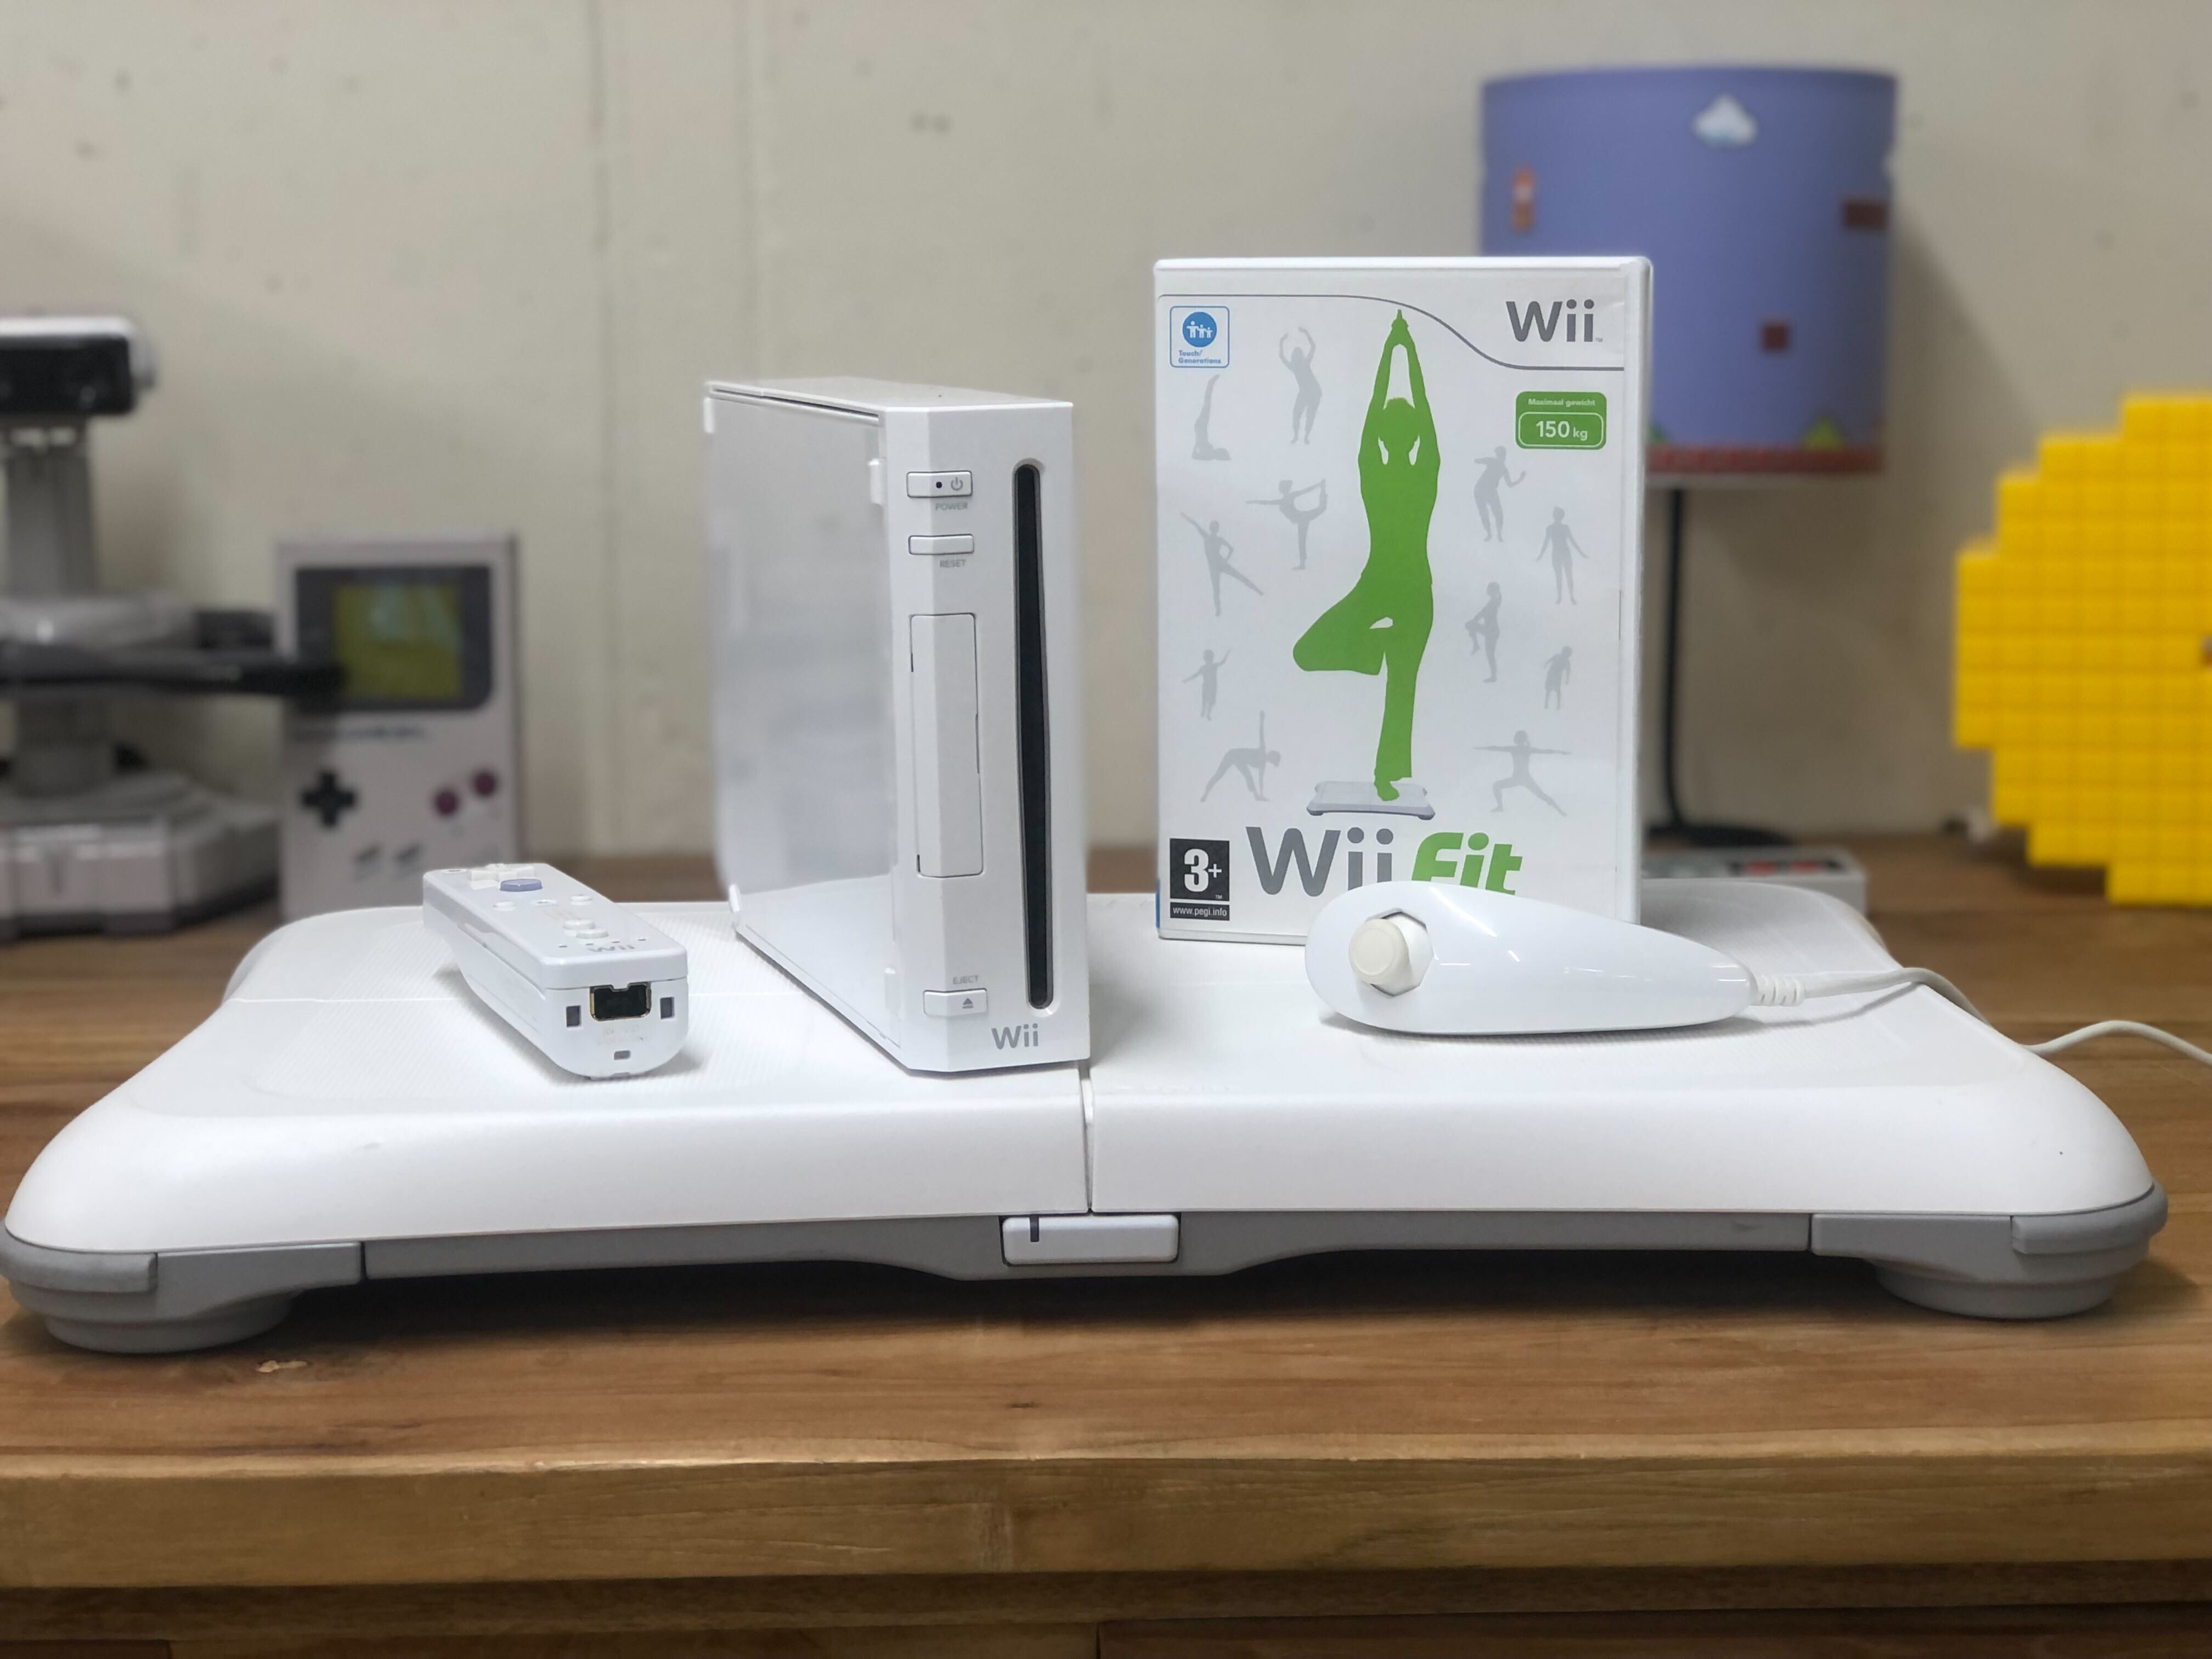 Nintendo Wii Console Starter Pack - Wii Fit Edition | levelseven